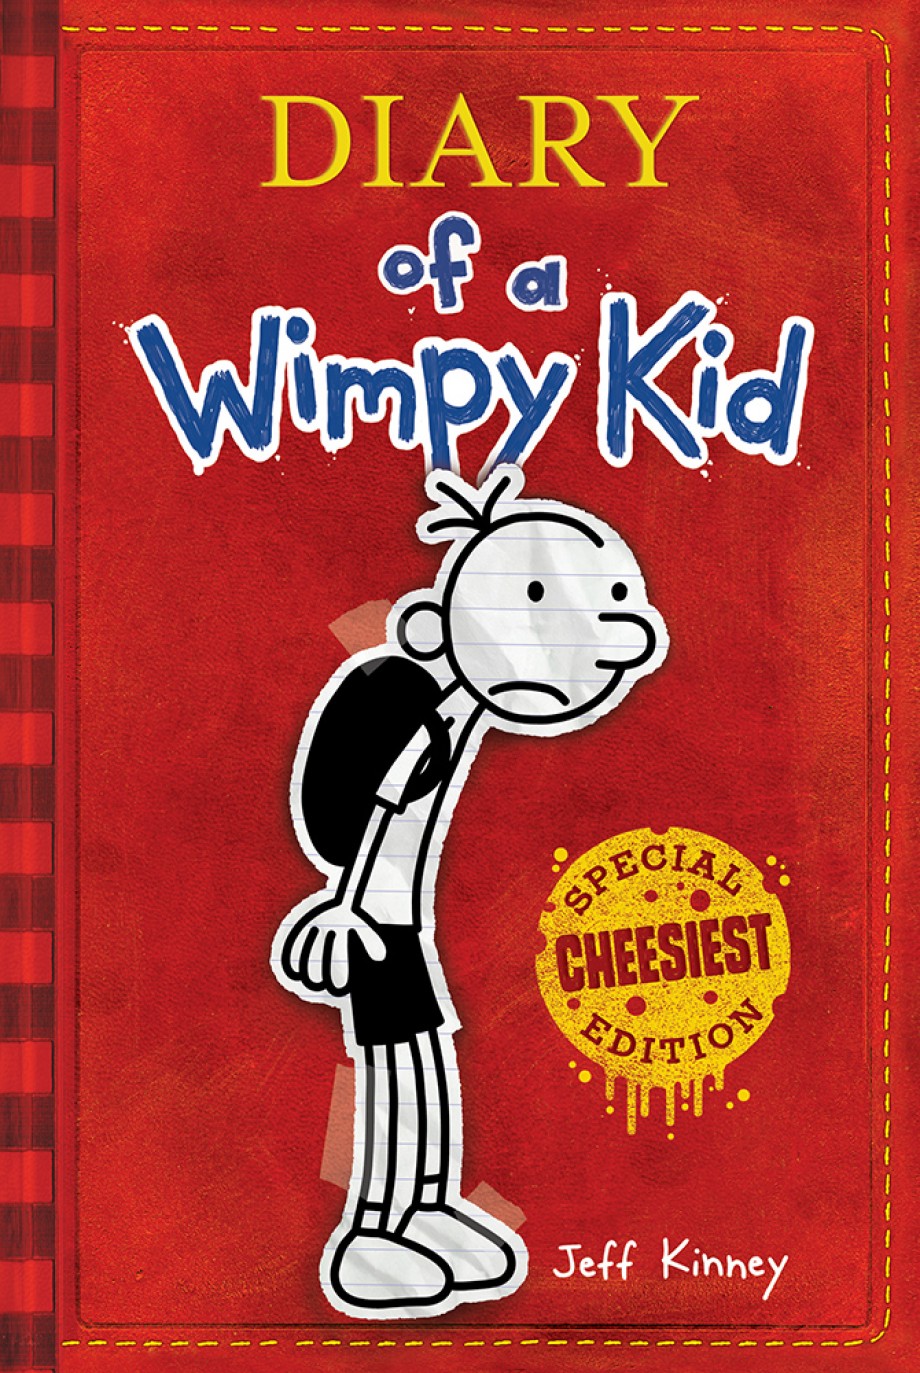 Diary of a Wimpy Kid Special CHEESIEST Edition (Diary of a Wimpy Kid #1) 